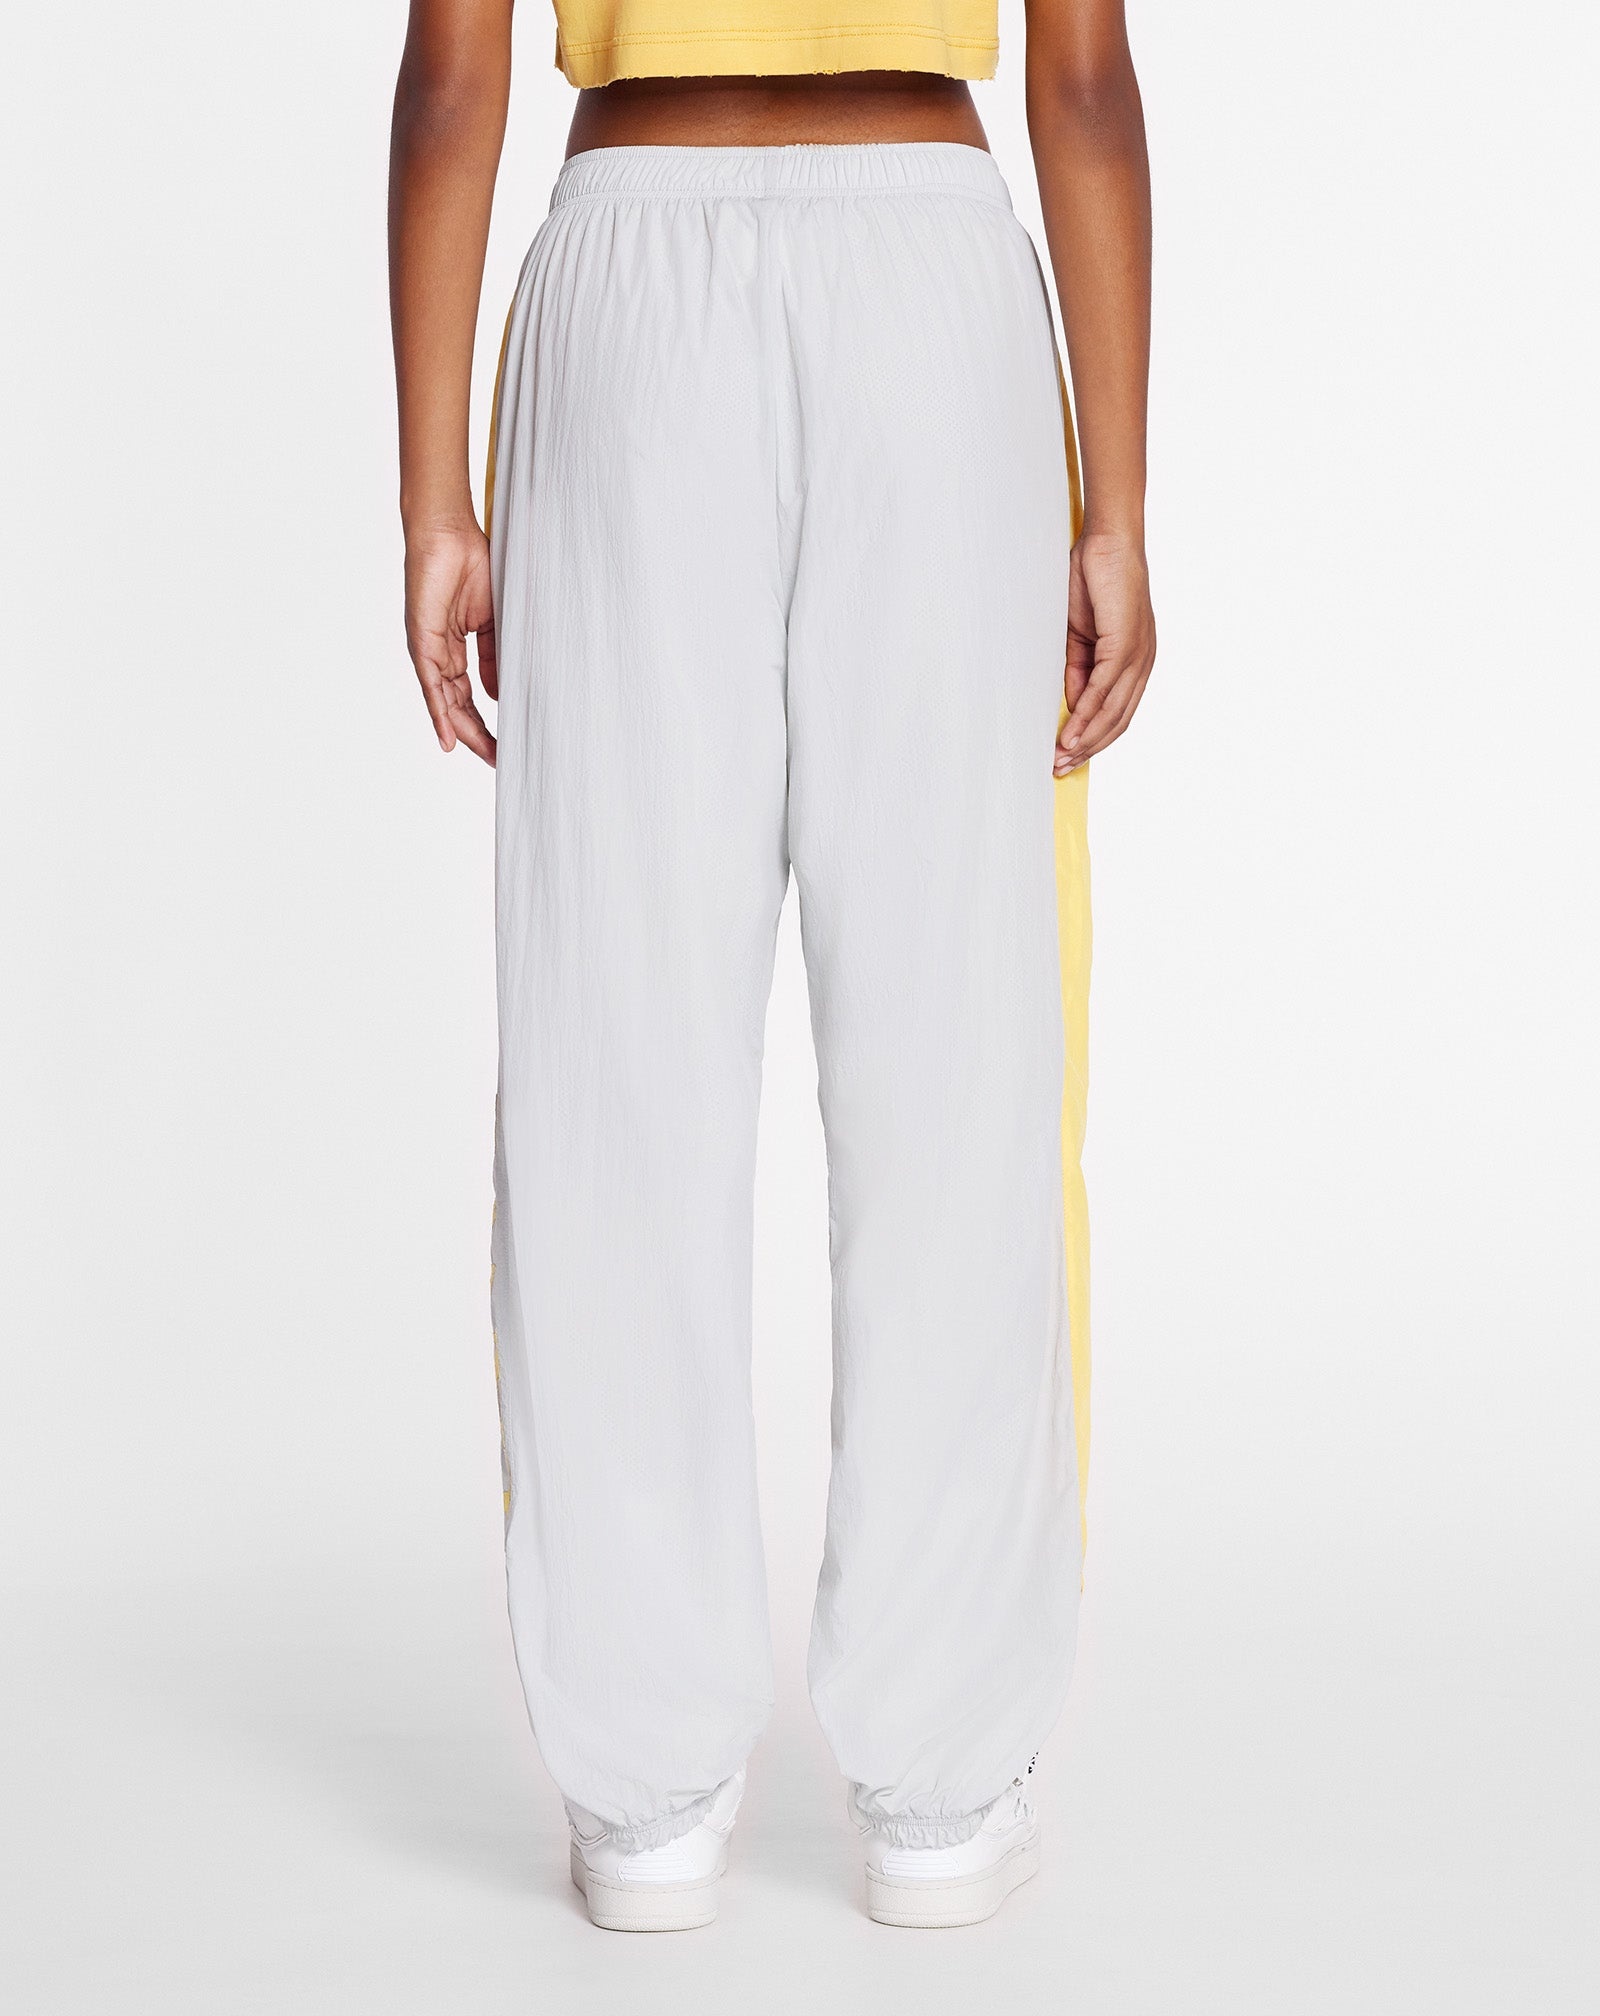 LANVIN X FUTURE JOGGING PANTS WITH CONTRASTING STRIPES - 6